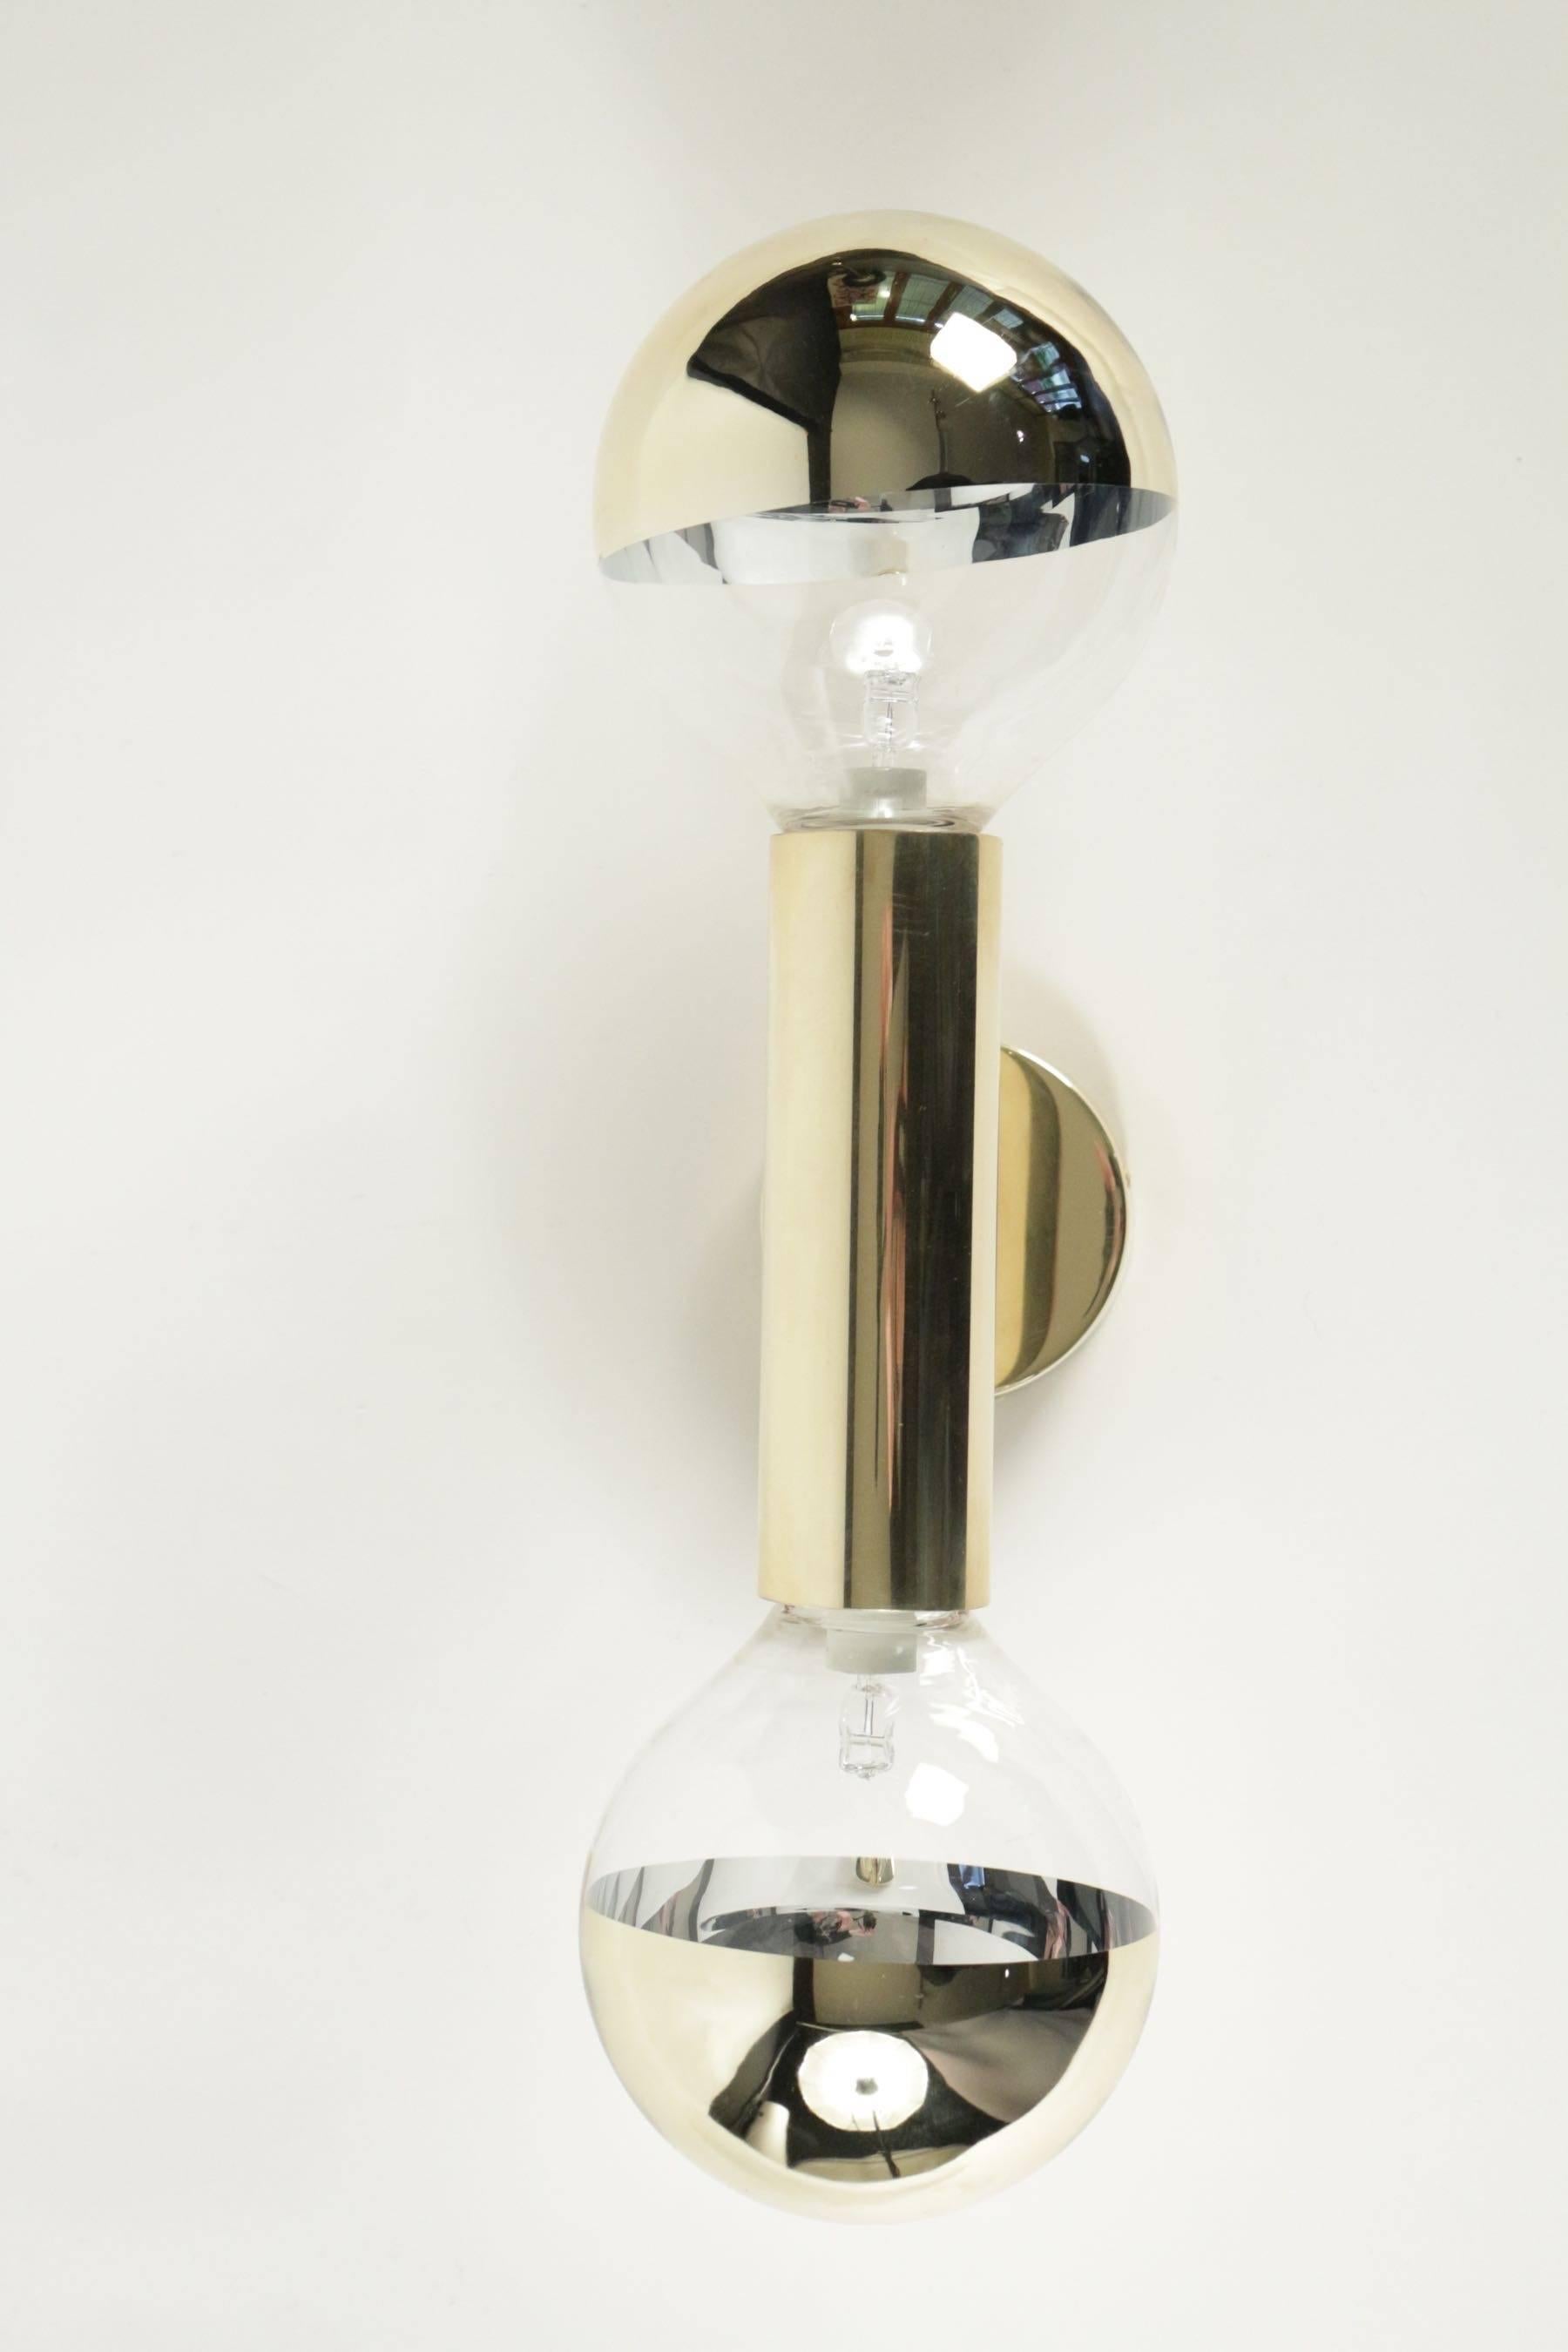 1960s Large Pair of Double Brass Sconces Attributed to Hans Agne Jakobsson.

Each sconce is composed by two large bulbs mounted on brass structure.

